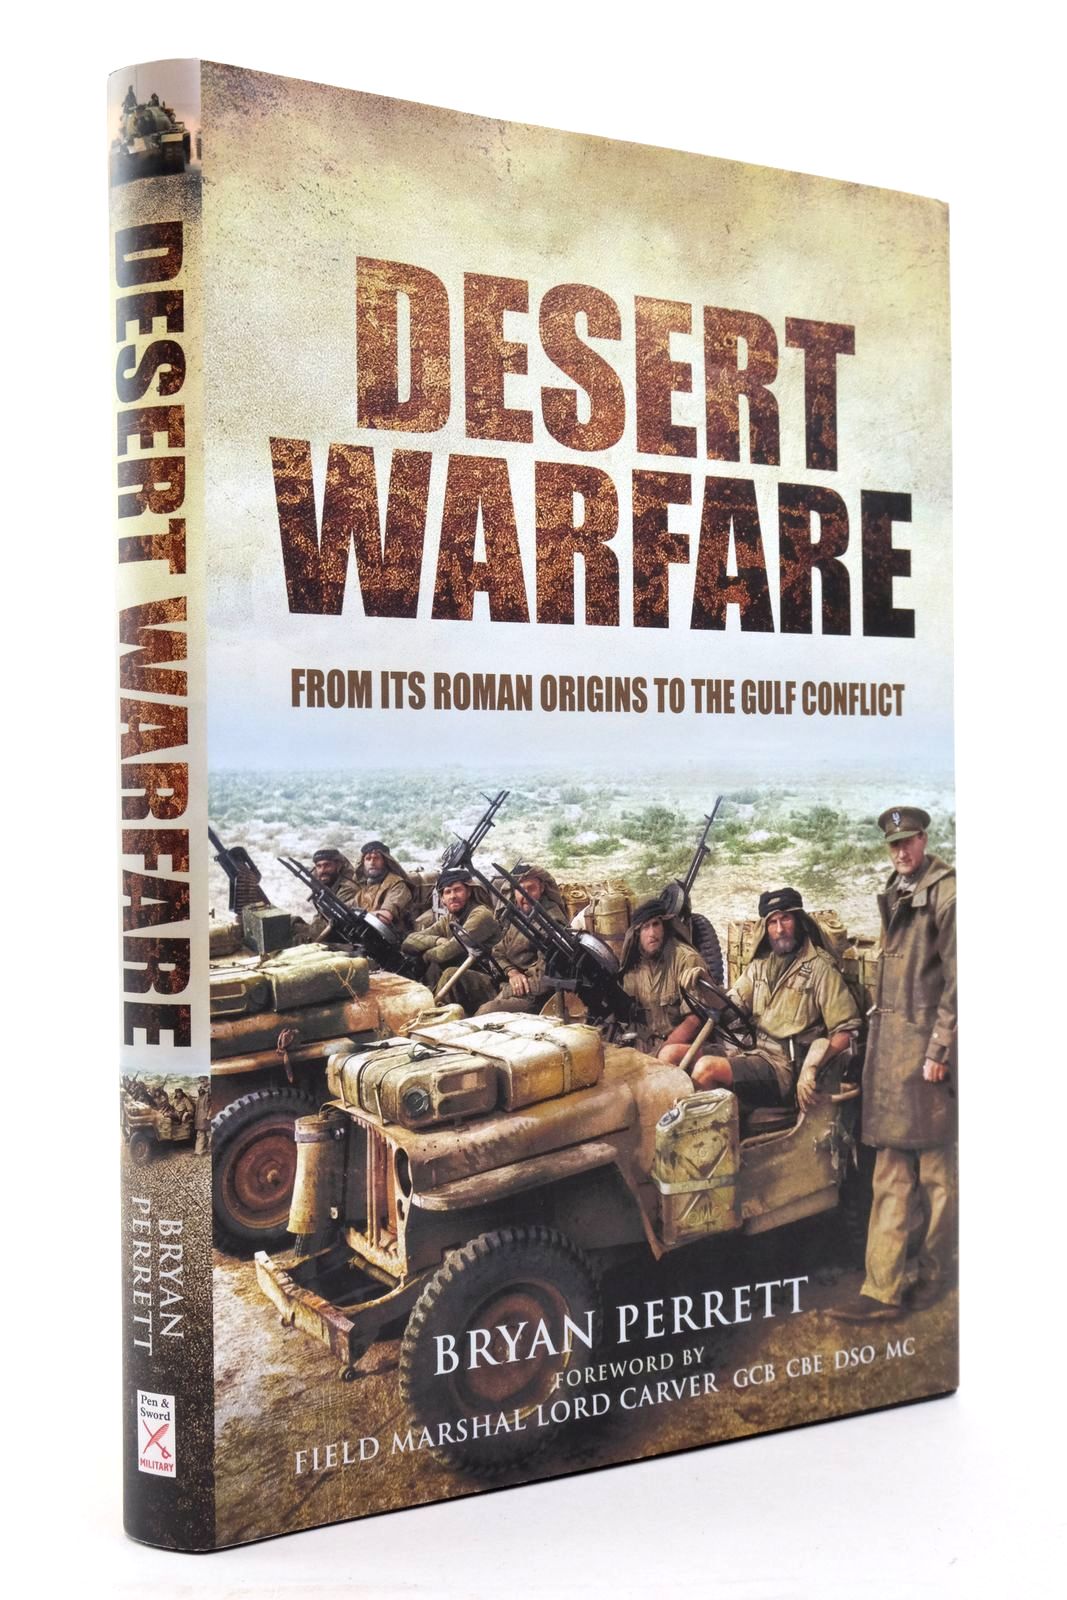 Photo of DESERT WARFARE written by Perrett, Bryan published by Pen & Sword Military (STOCK CODE: 2137272)  for sale by Stella & Rose's Books